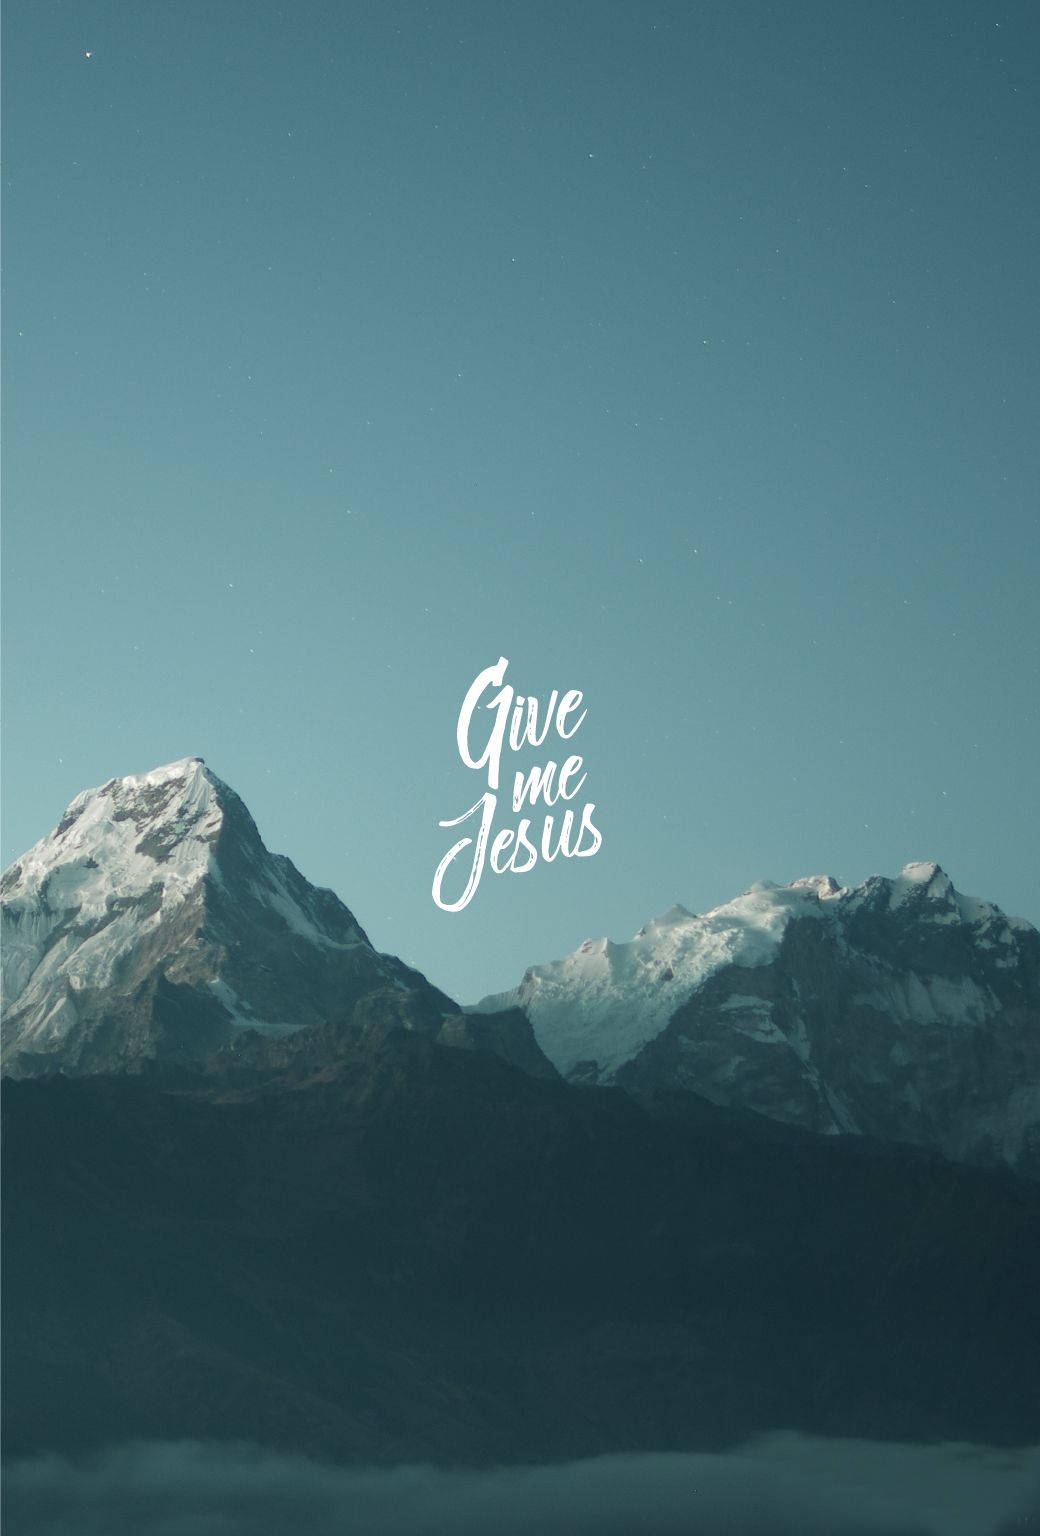 Download Cute Christian Give Me Jesus Mountains Wallpaper 